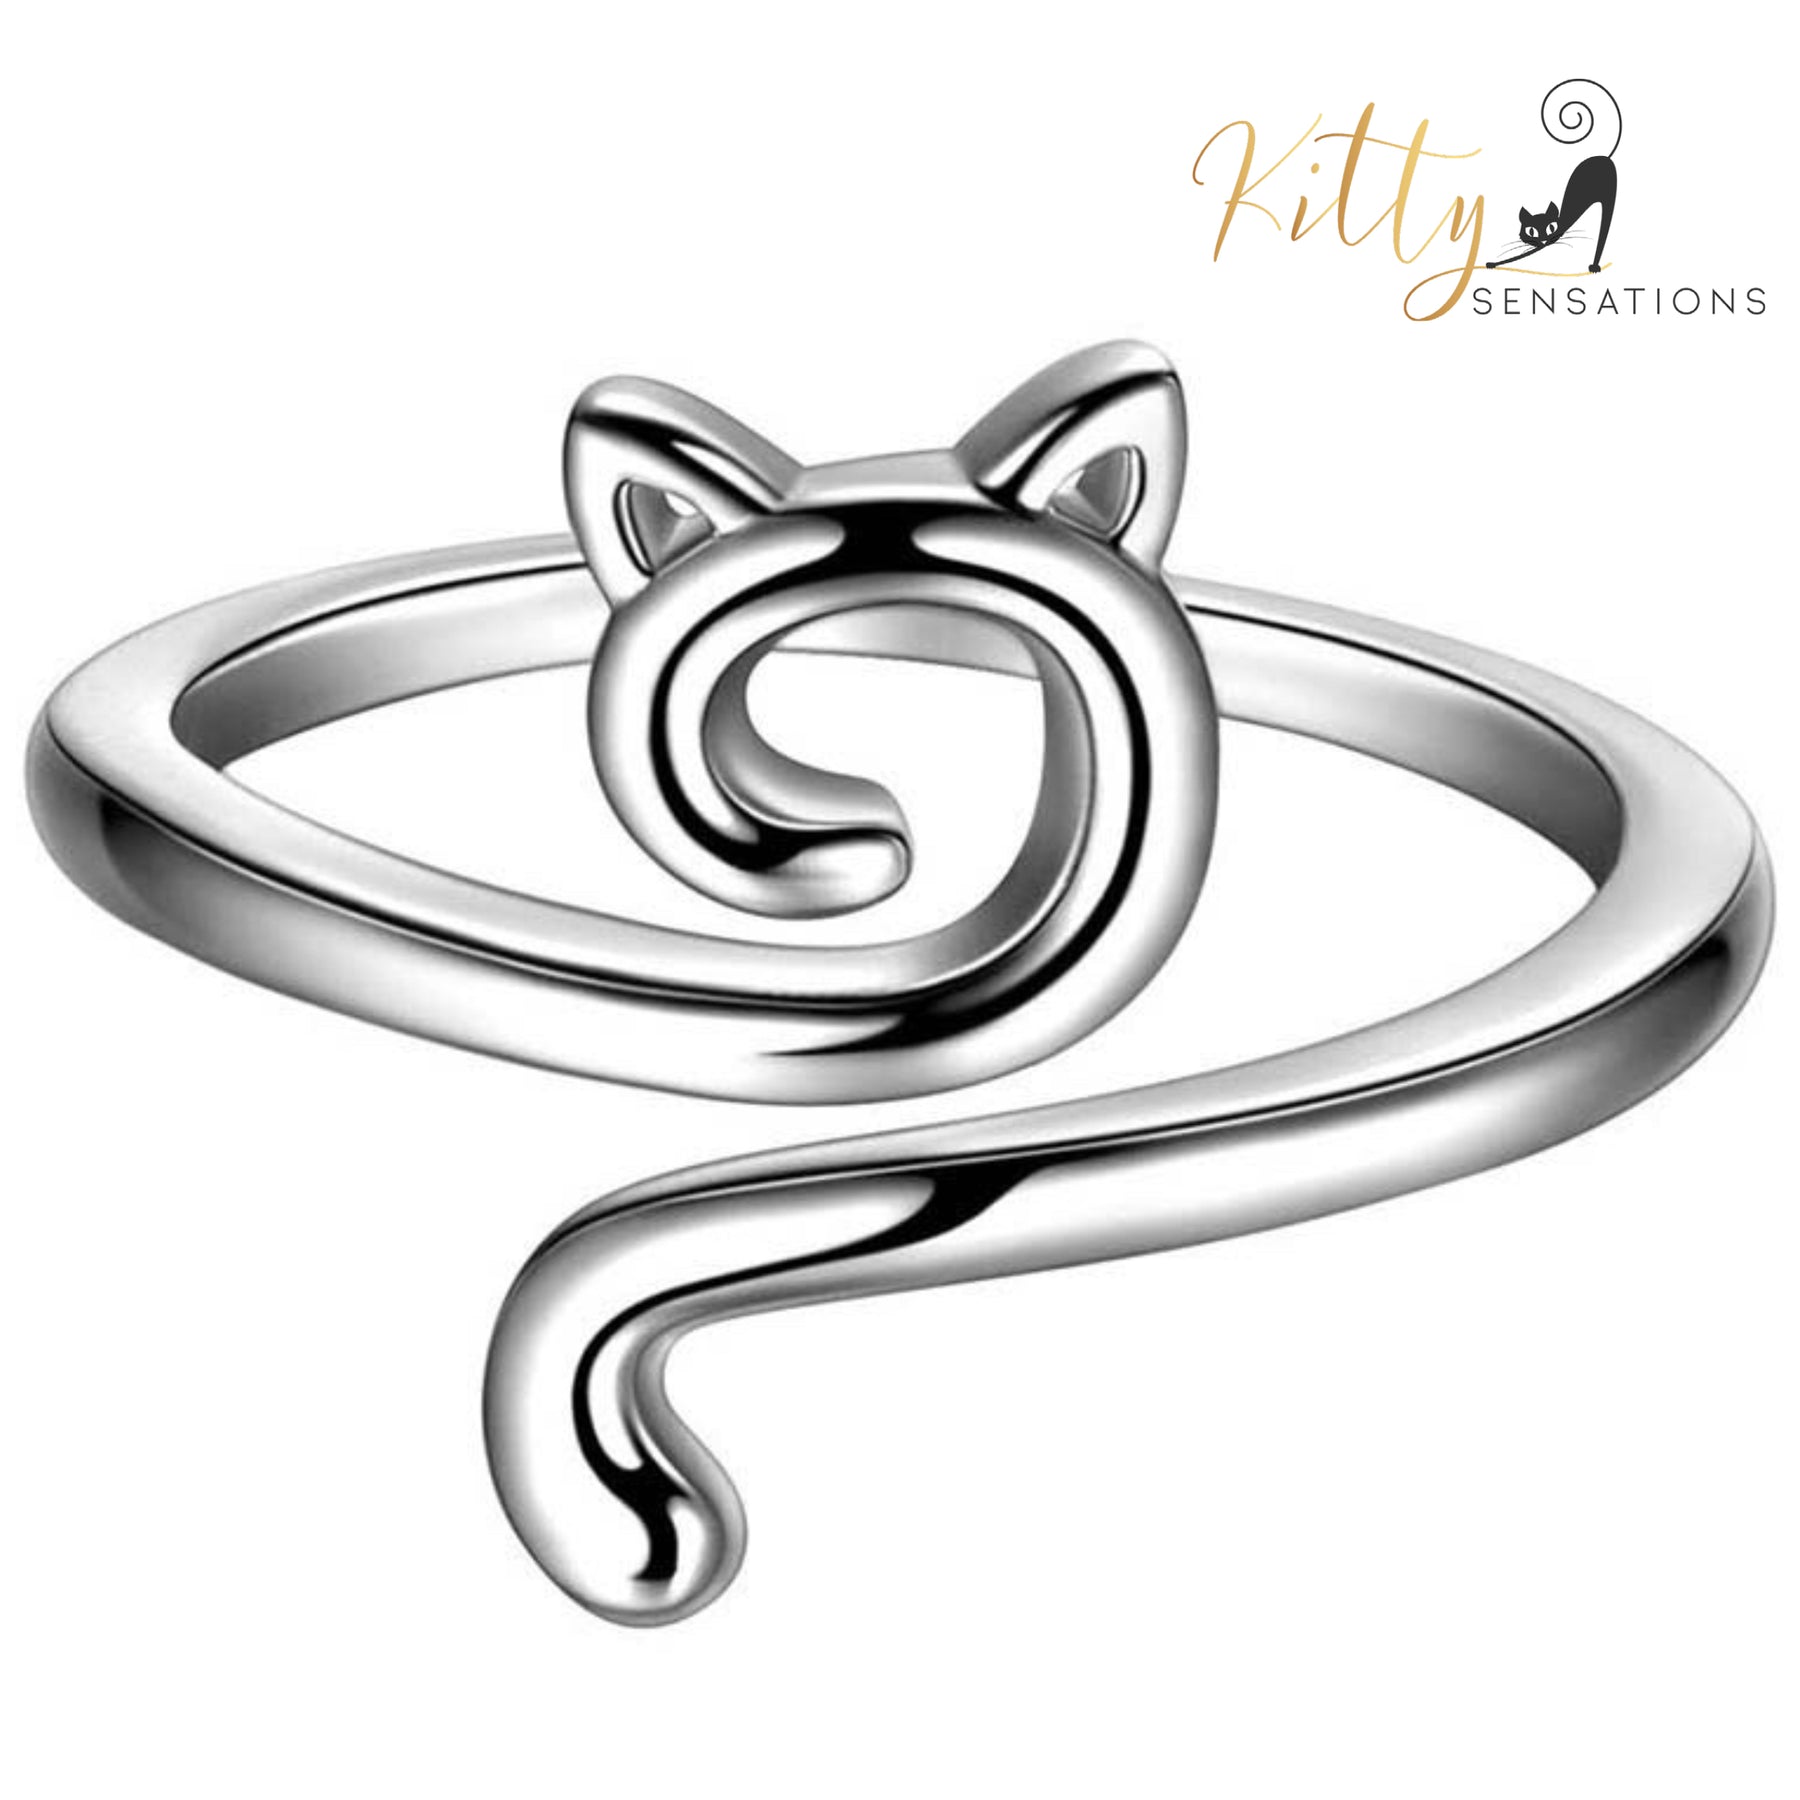 www.KittySensations.com: Open Face and Tail Cat Ring (Silver or Black) - Adjustable Size ($28): https://www.kittysensations.com/products/open-face-and-tail-cat-ring-silver-or-black